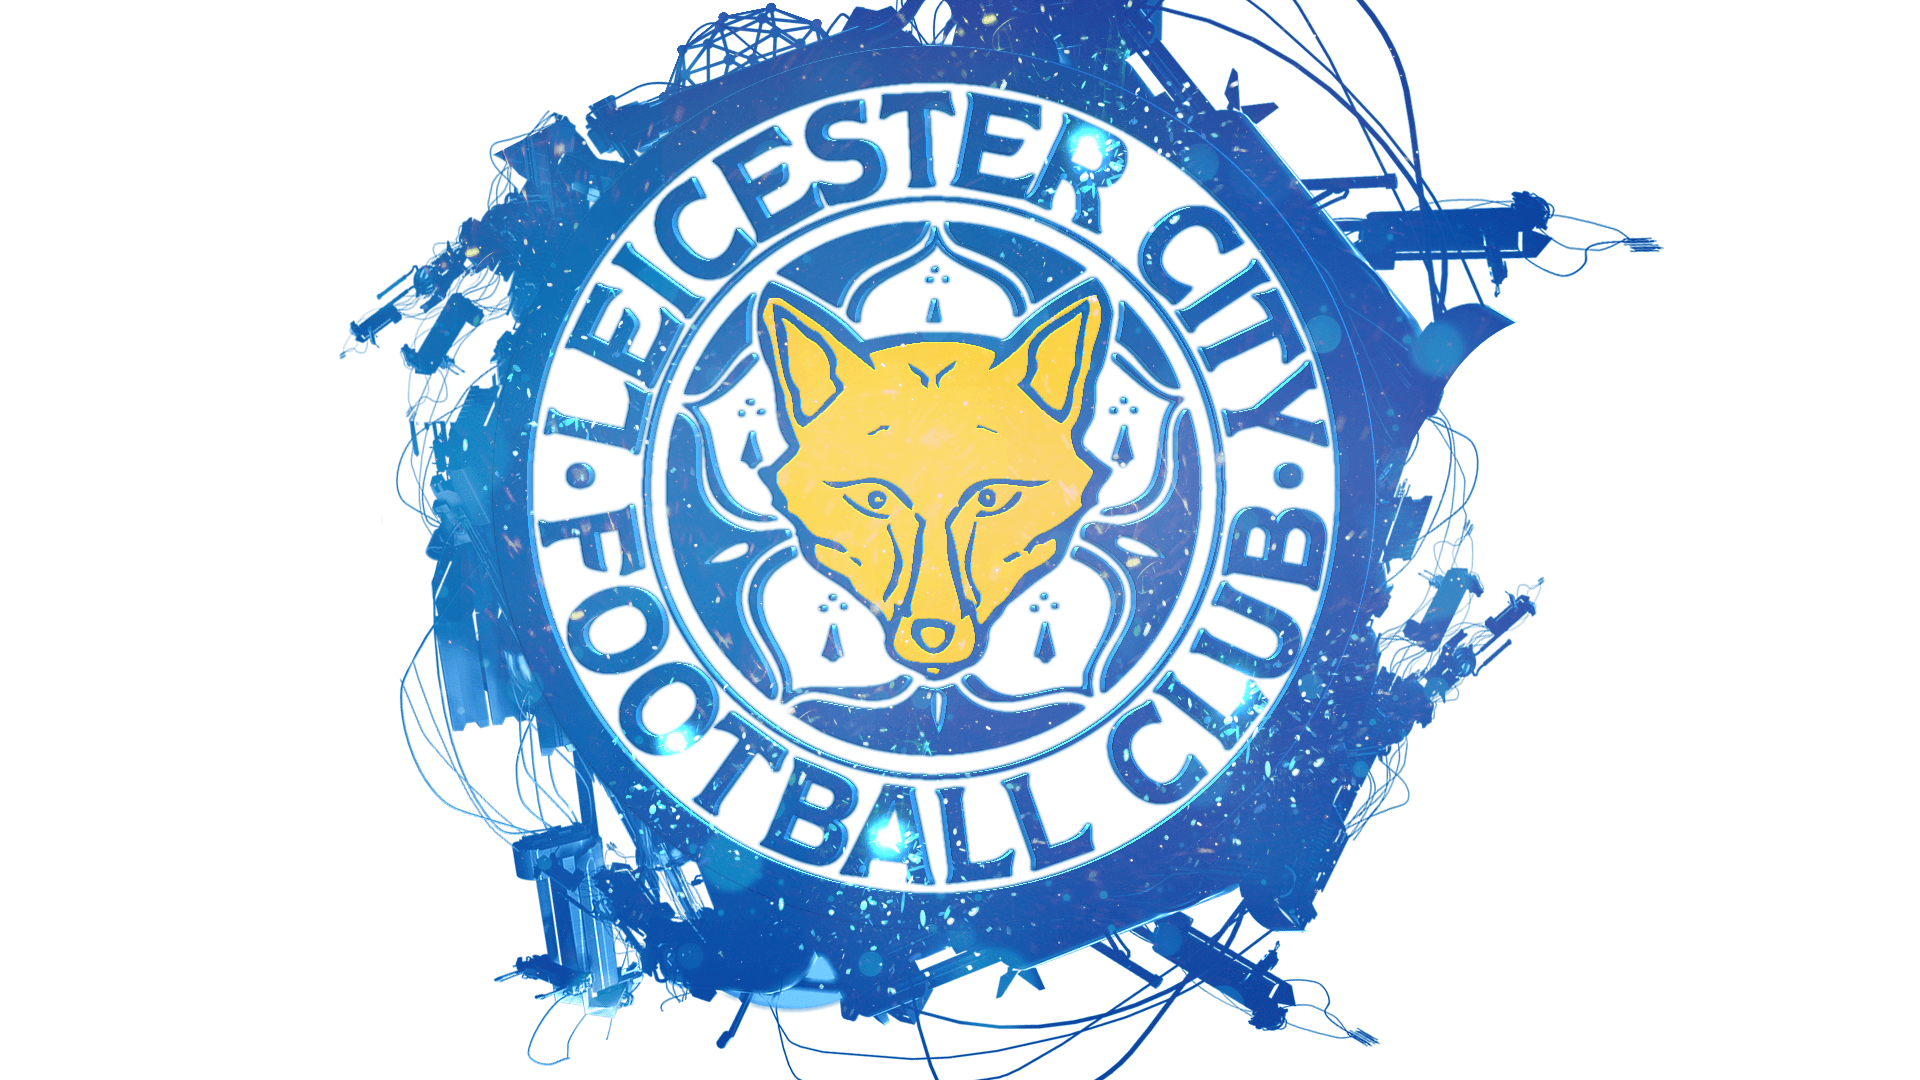 Leicester City Logo - Leicester City F.C. Wallpapers - Wallpaper Cave